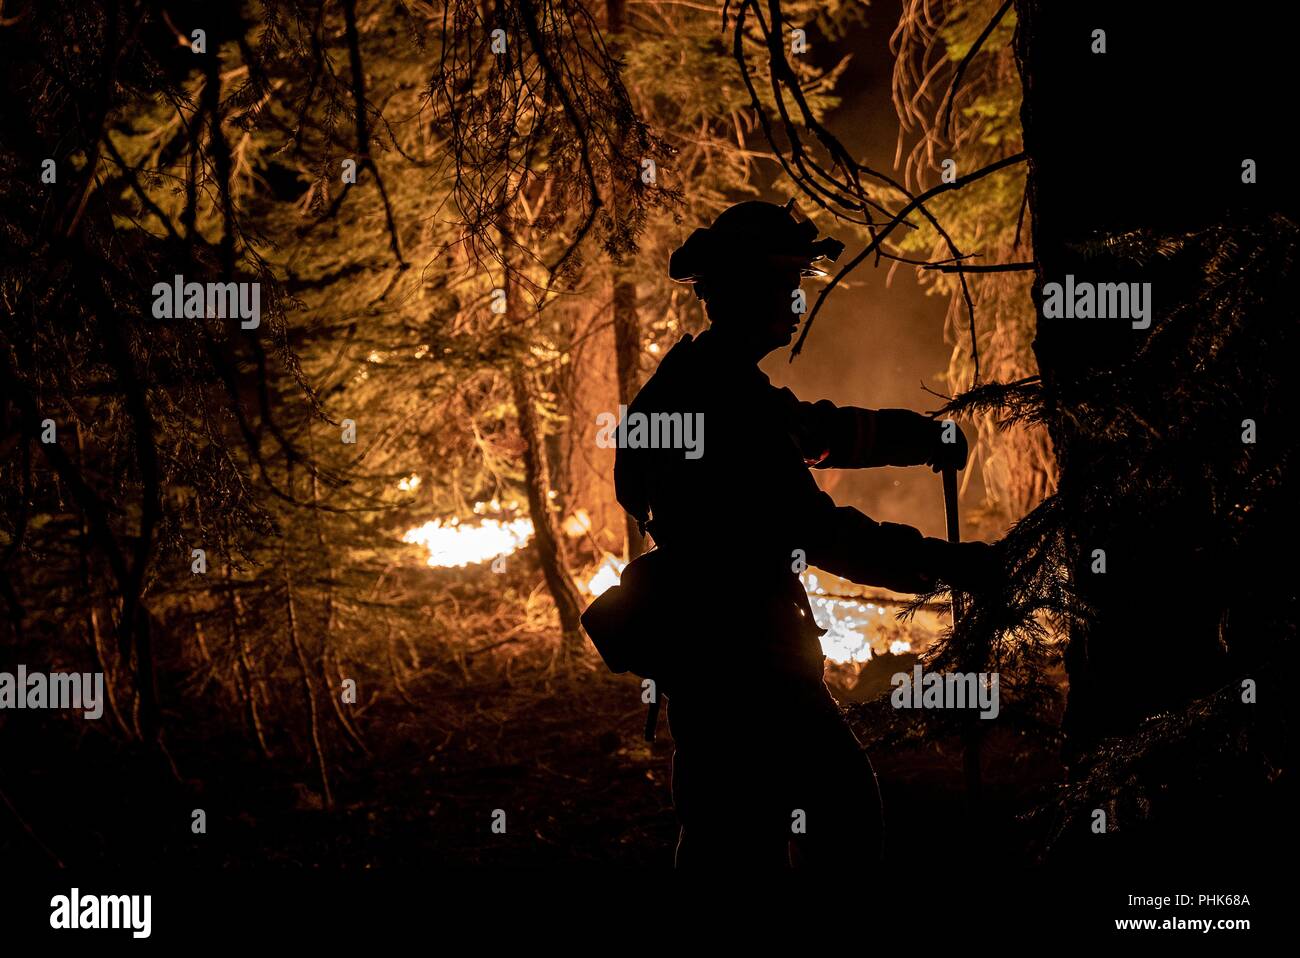 Cal State firefighters, work dousing embers at the Donnell Fire in Stanislaus National Forest August 12, 2018 near Sonora, California. The wildfire burned 36,335 acres and destroyed 54 major structures across Northern California. Stock Photo